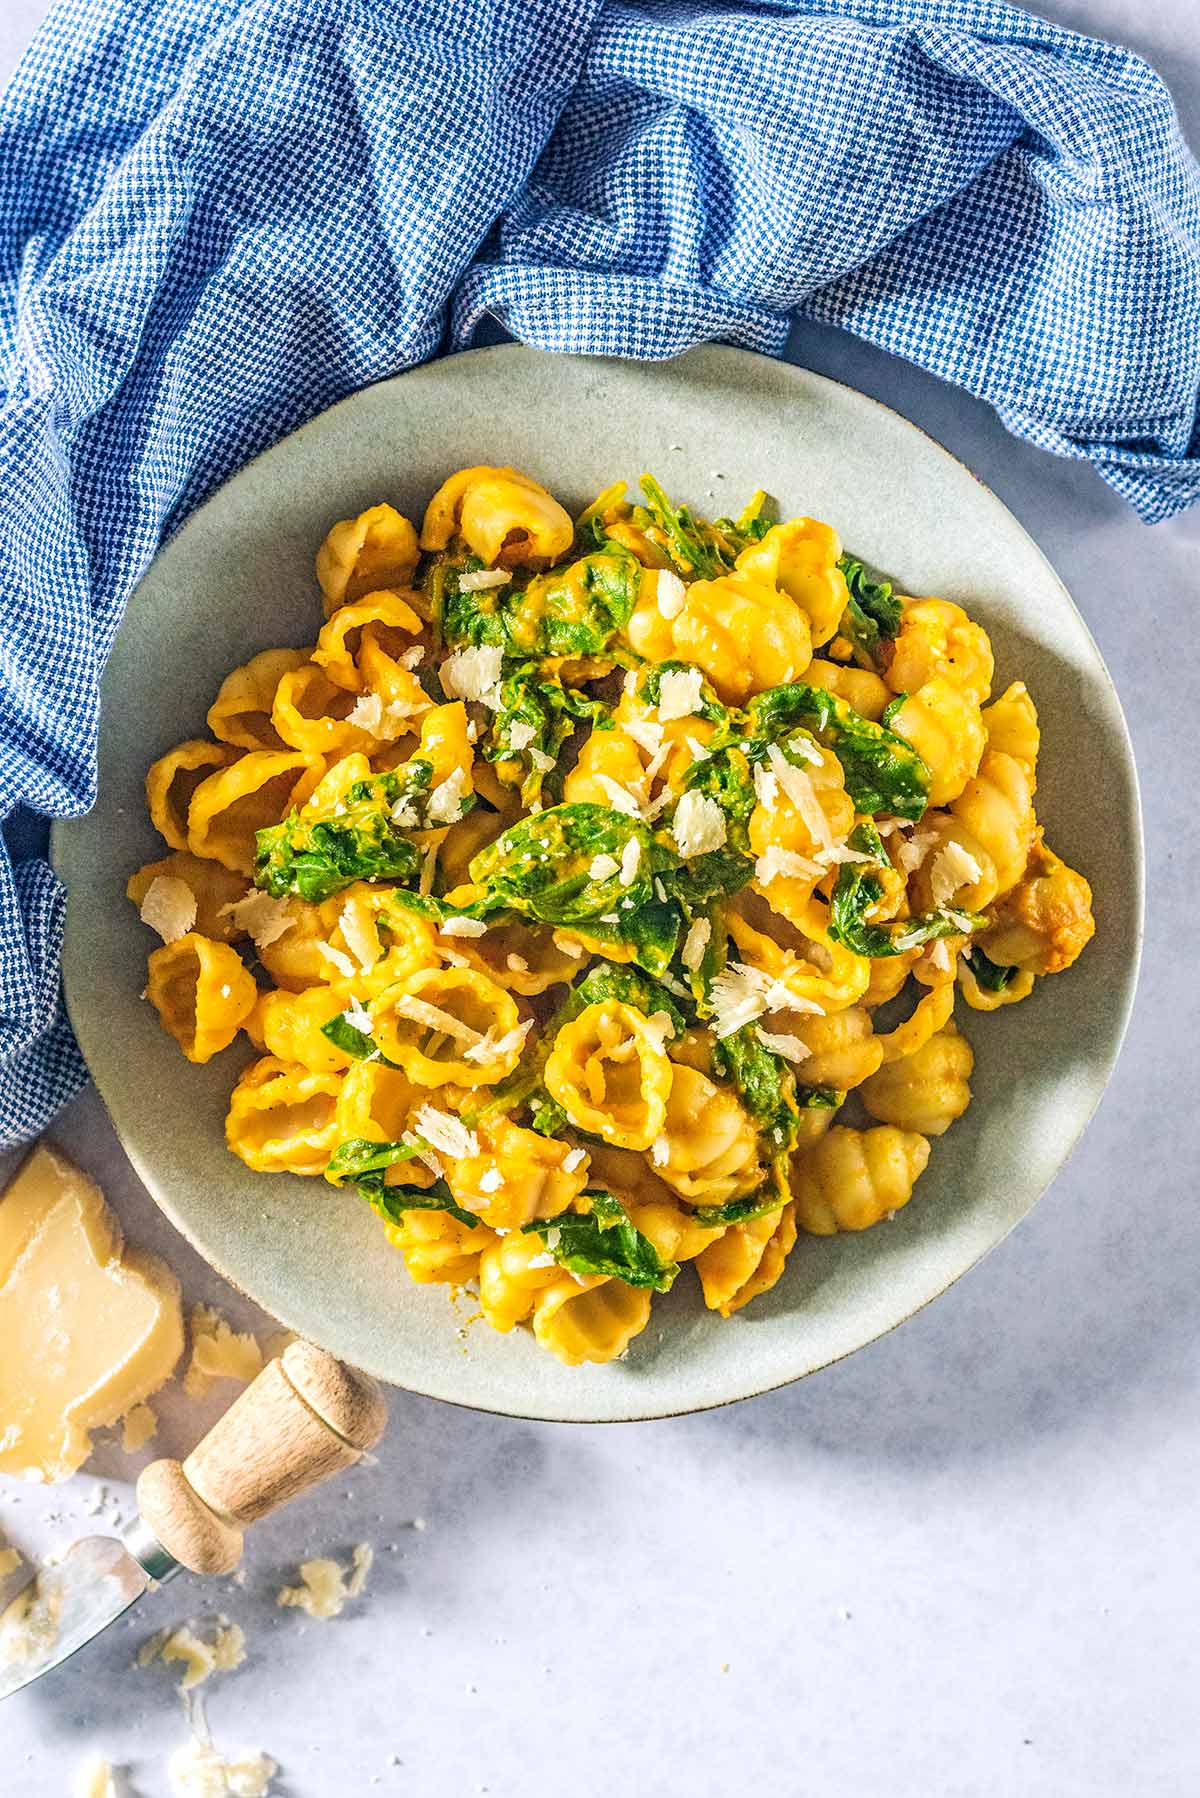 A bowl of conchiglie pasta in a sauce with spinach.